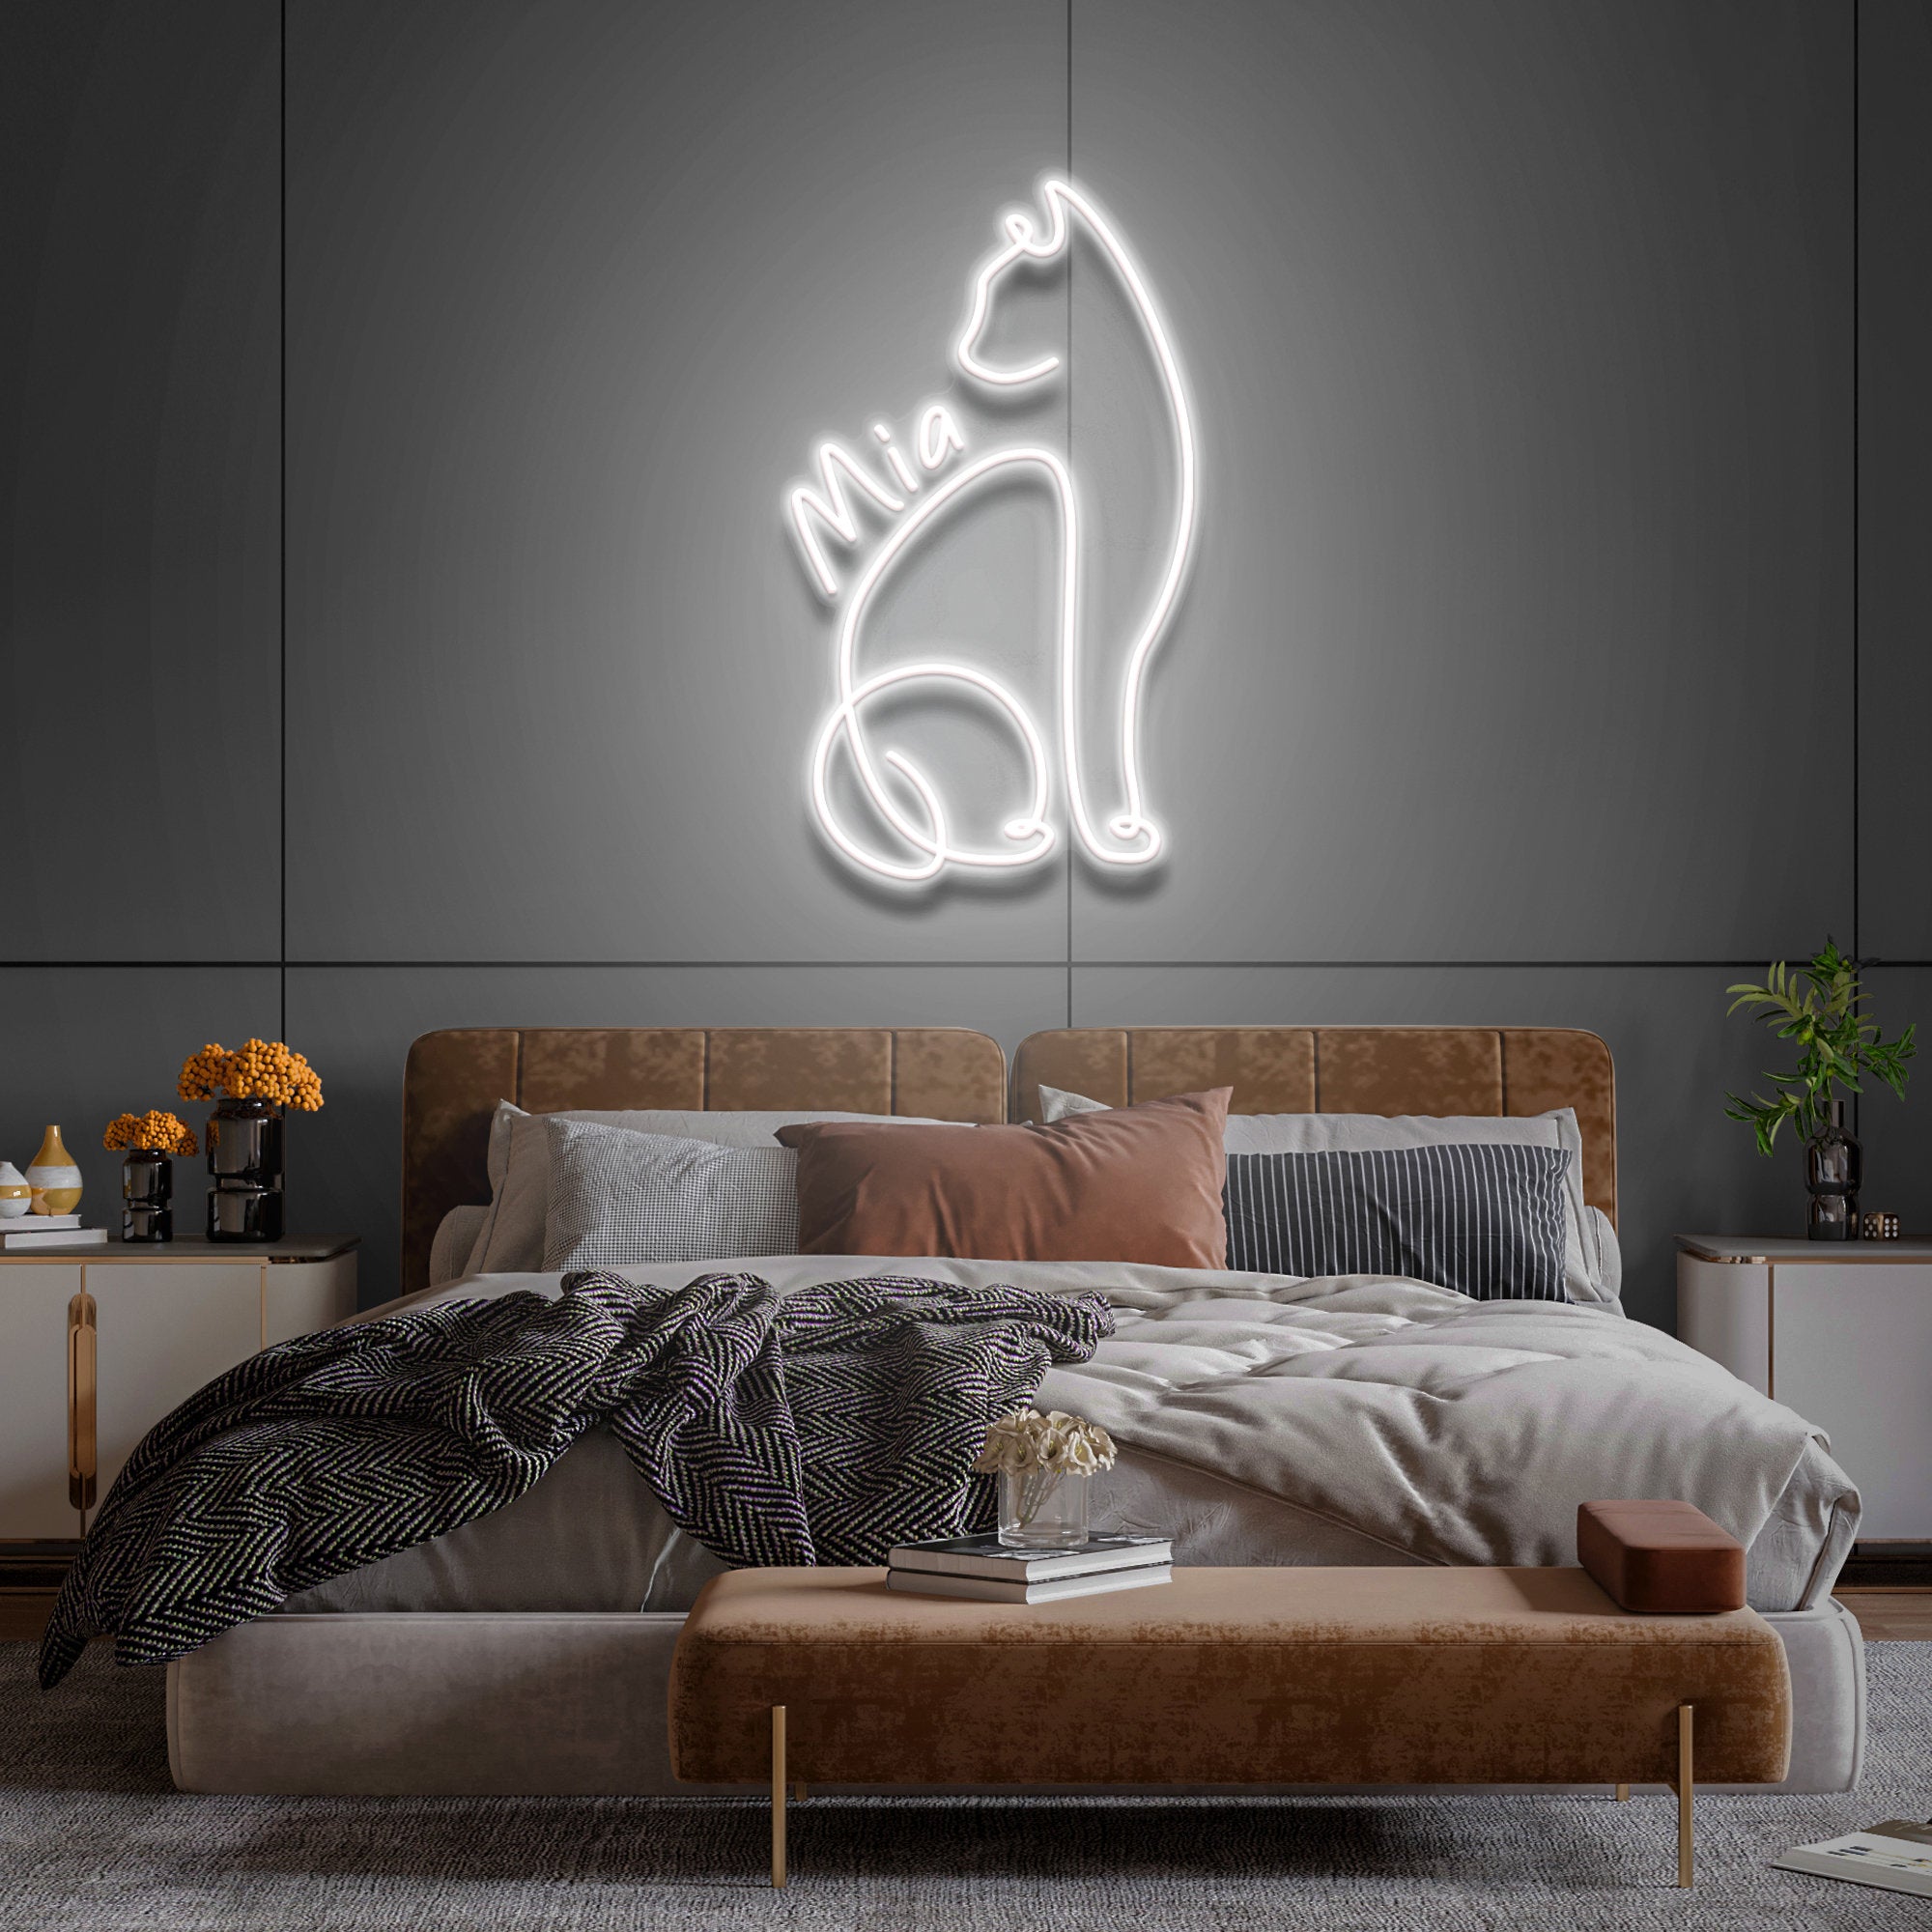 NEONIP - Personalized 100% Handmade Cat LED Neon Sign with Your Pet's Name